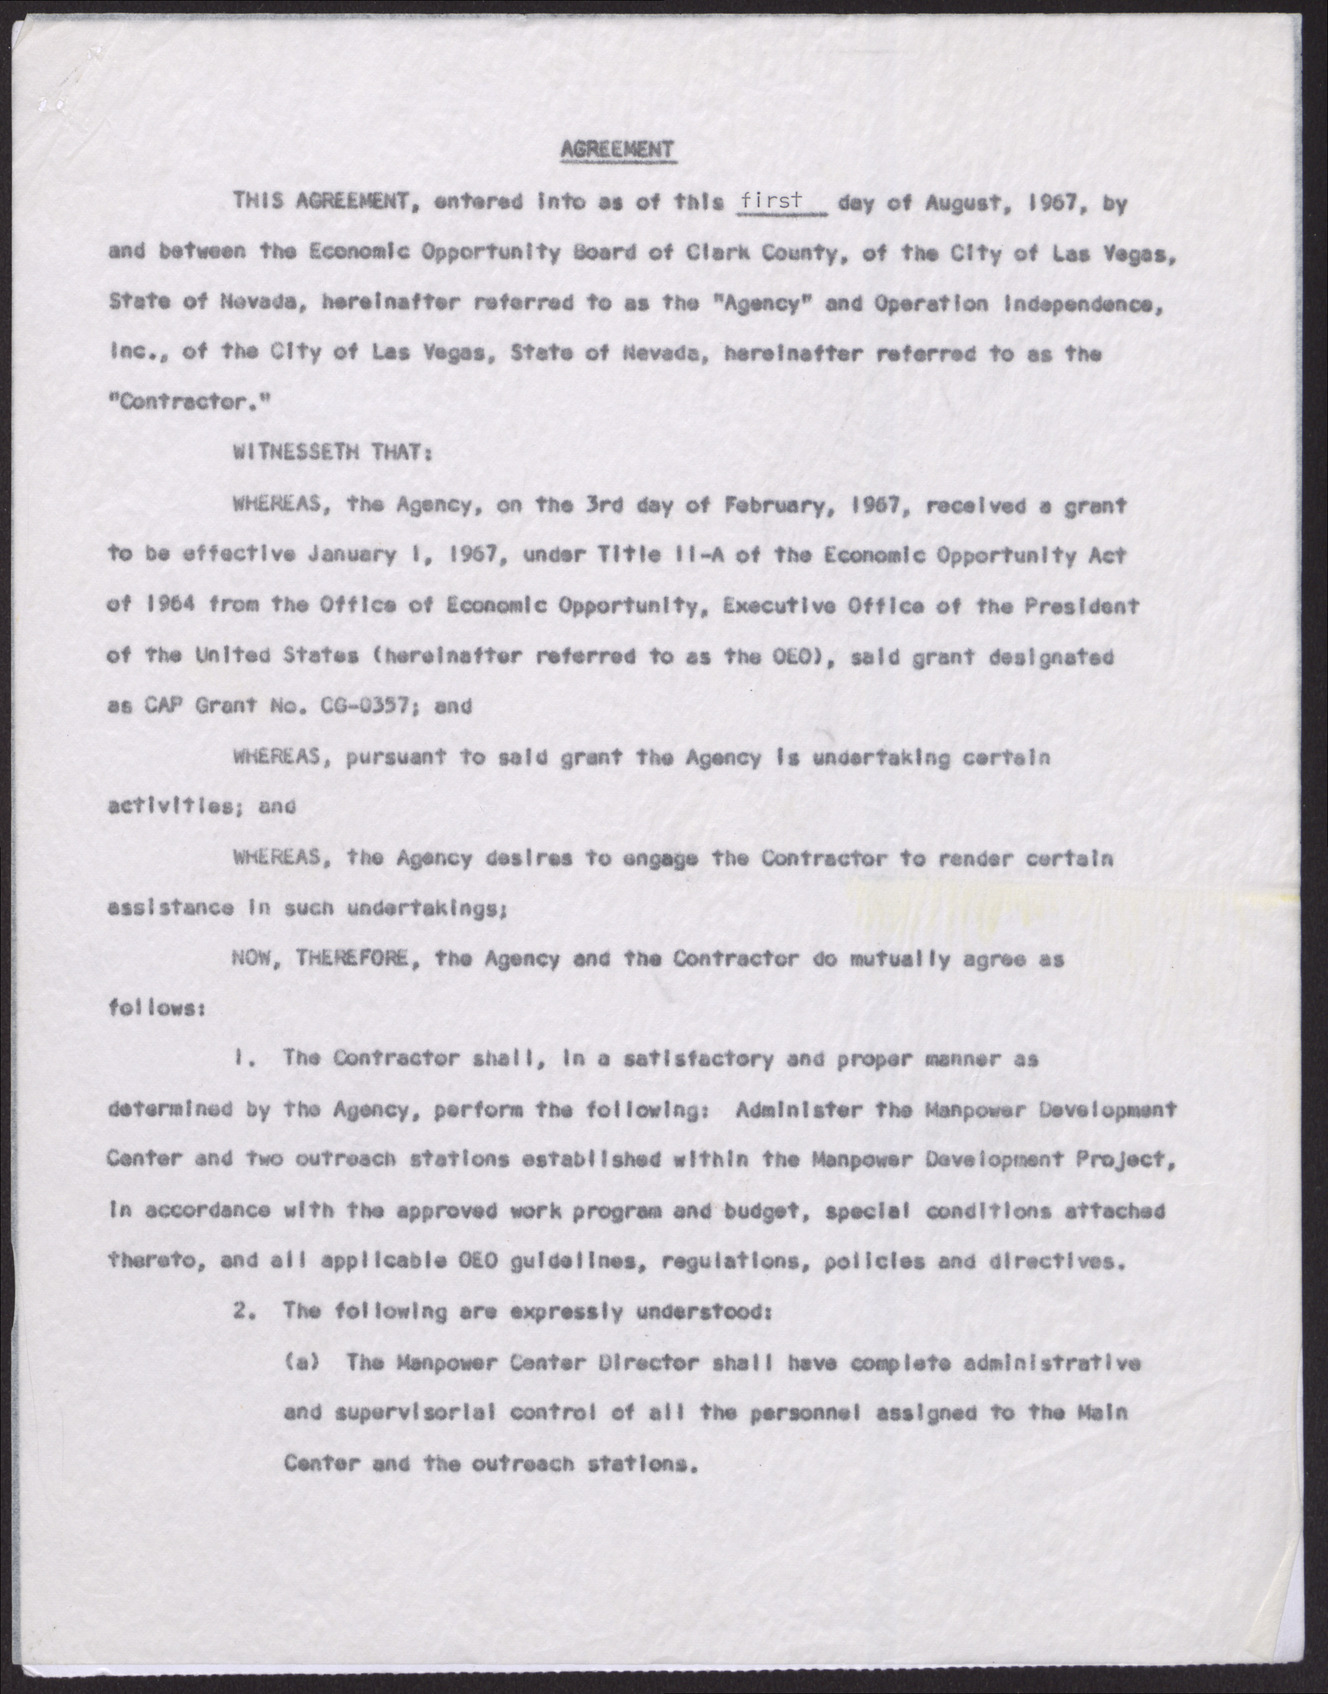 Contract of Agreement between the EOB and Operation Independence, Inc. (4 pages), August 1, 1967